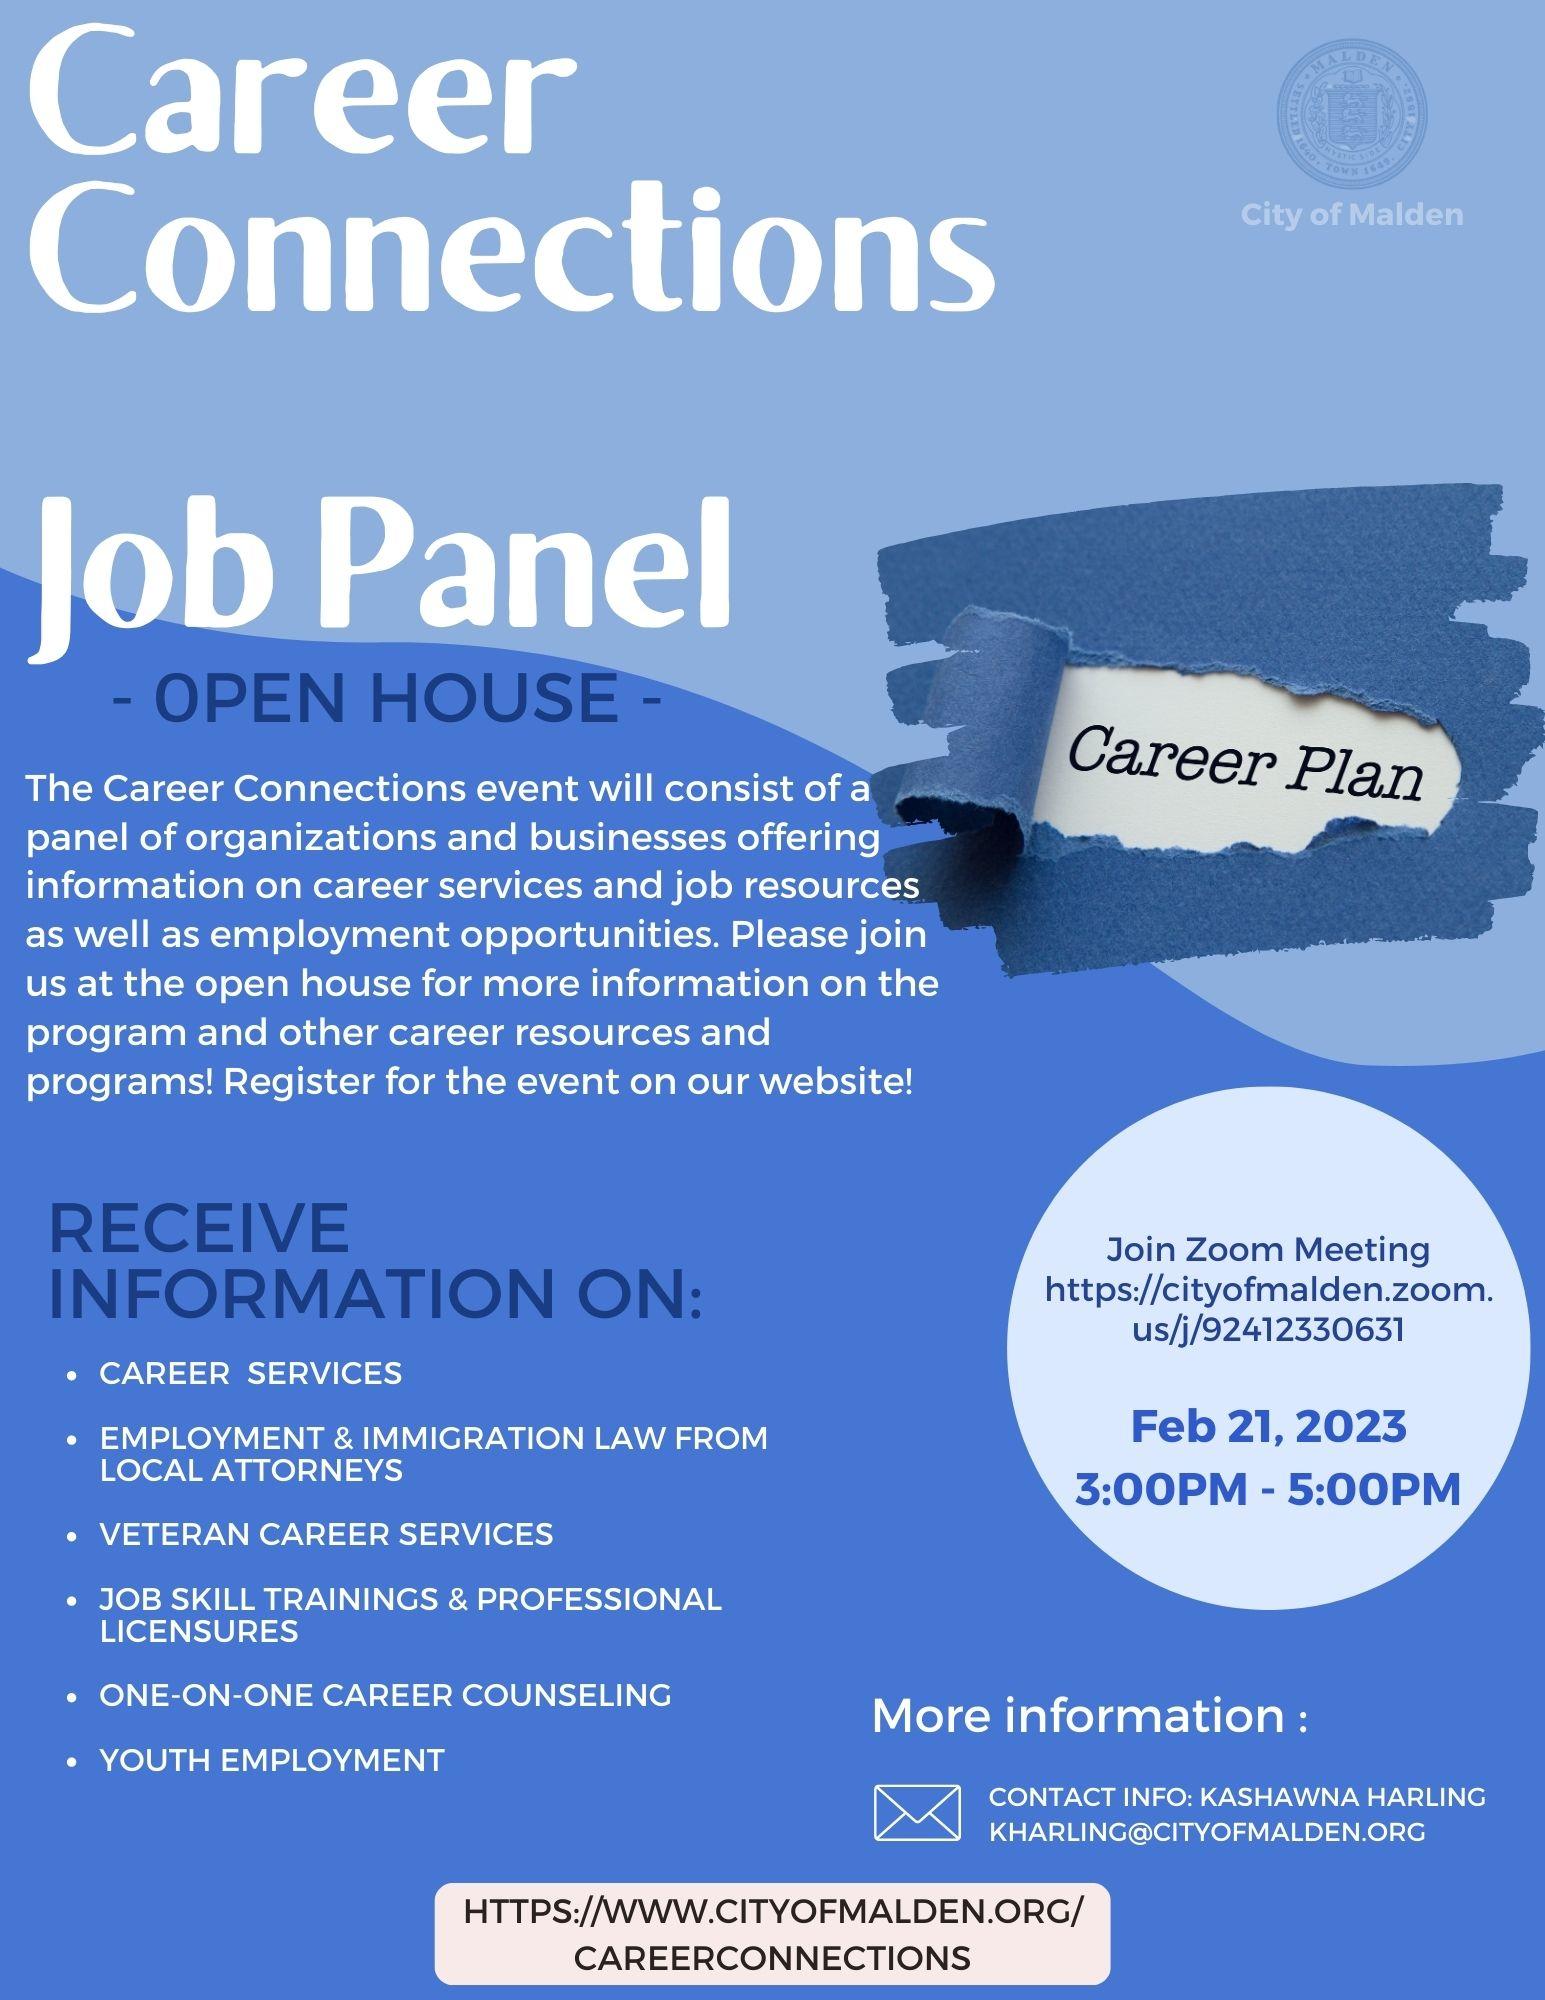 Flyer for the event Career Connections